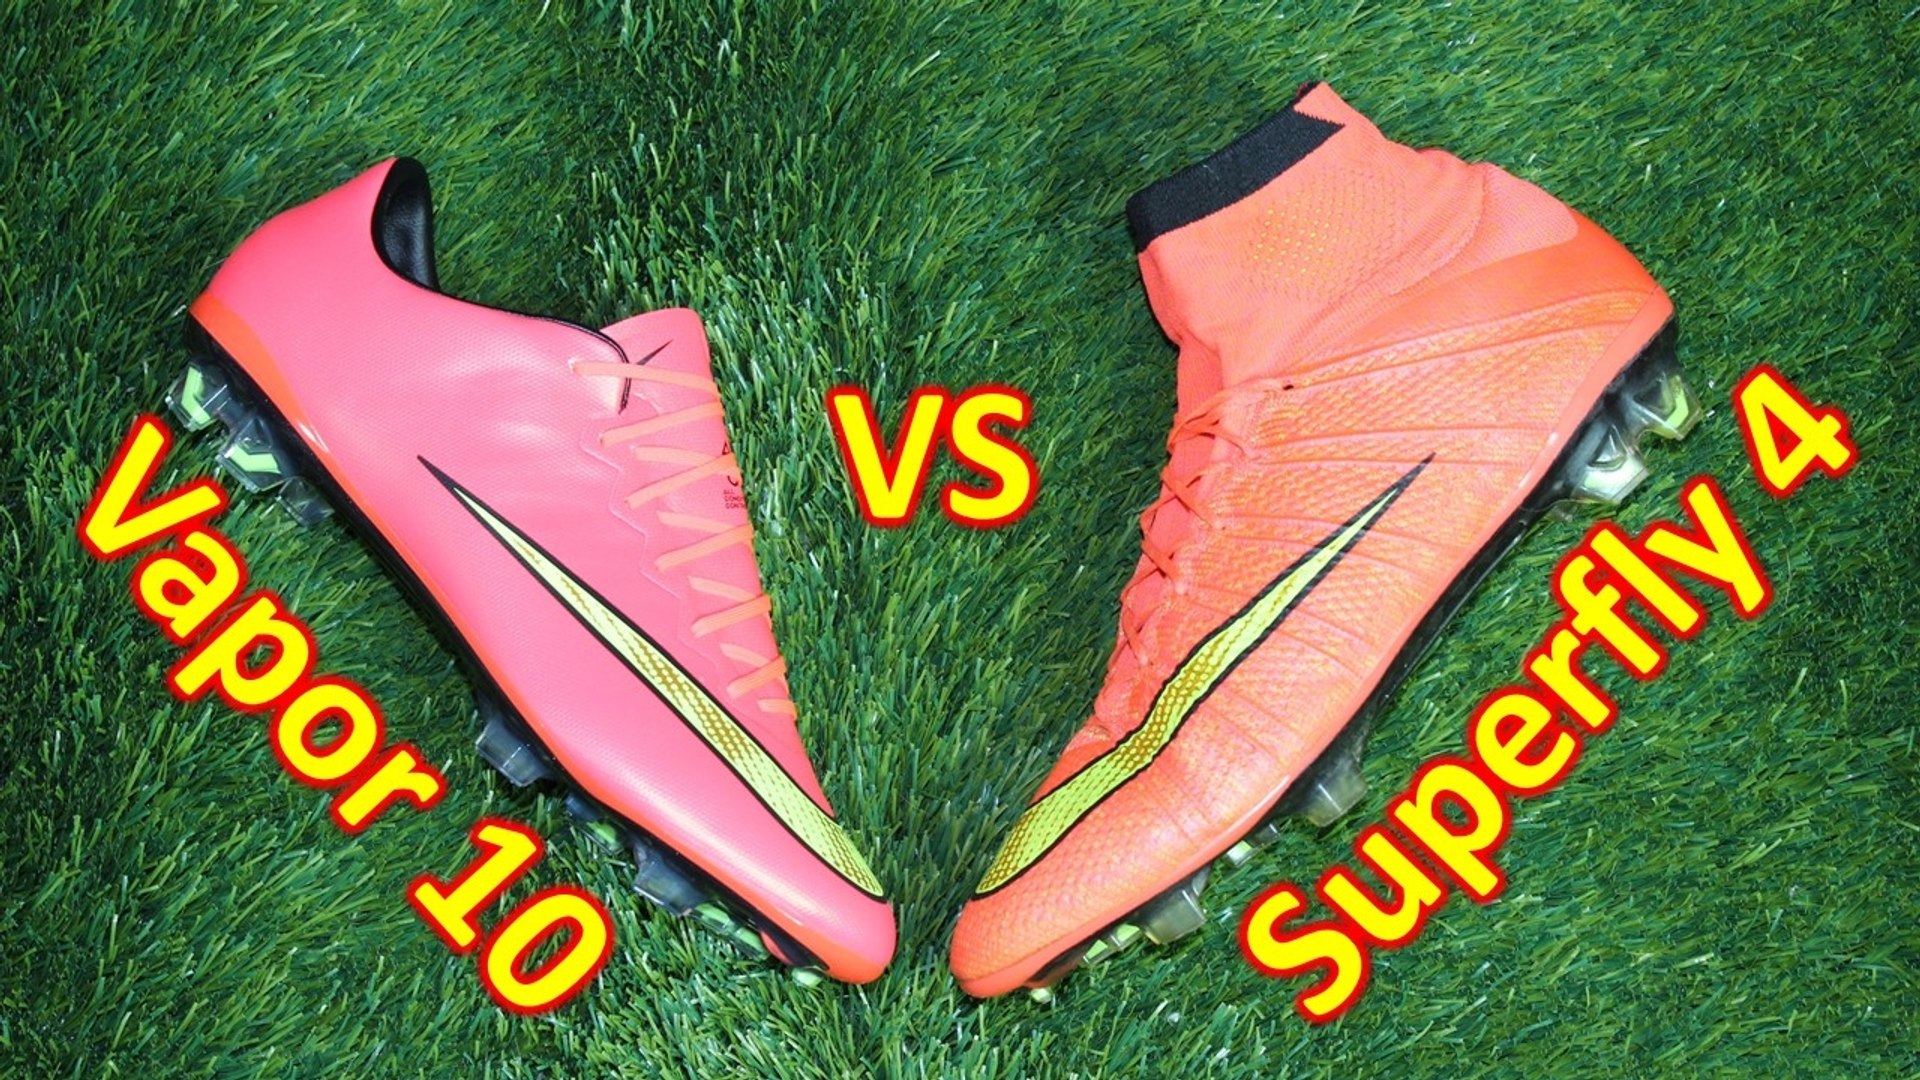 Nike Mercurial Superfly 4 Mercurial Vapor 10 Comparison & Review - Dailymotion